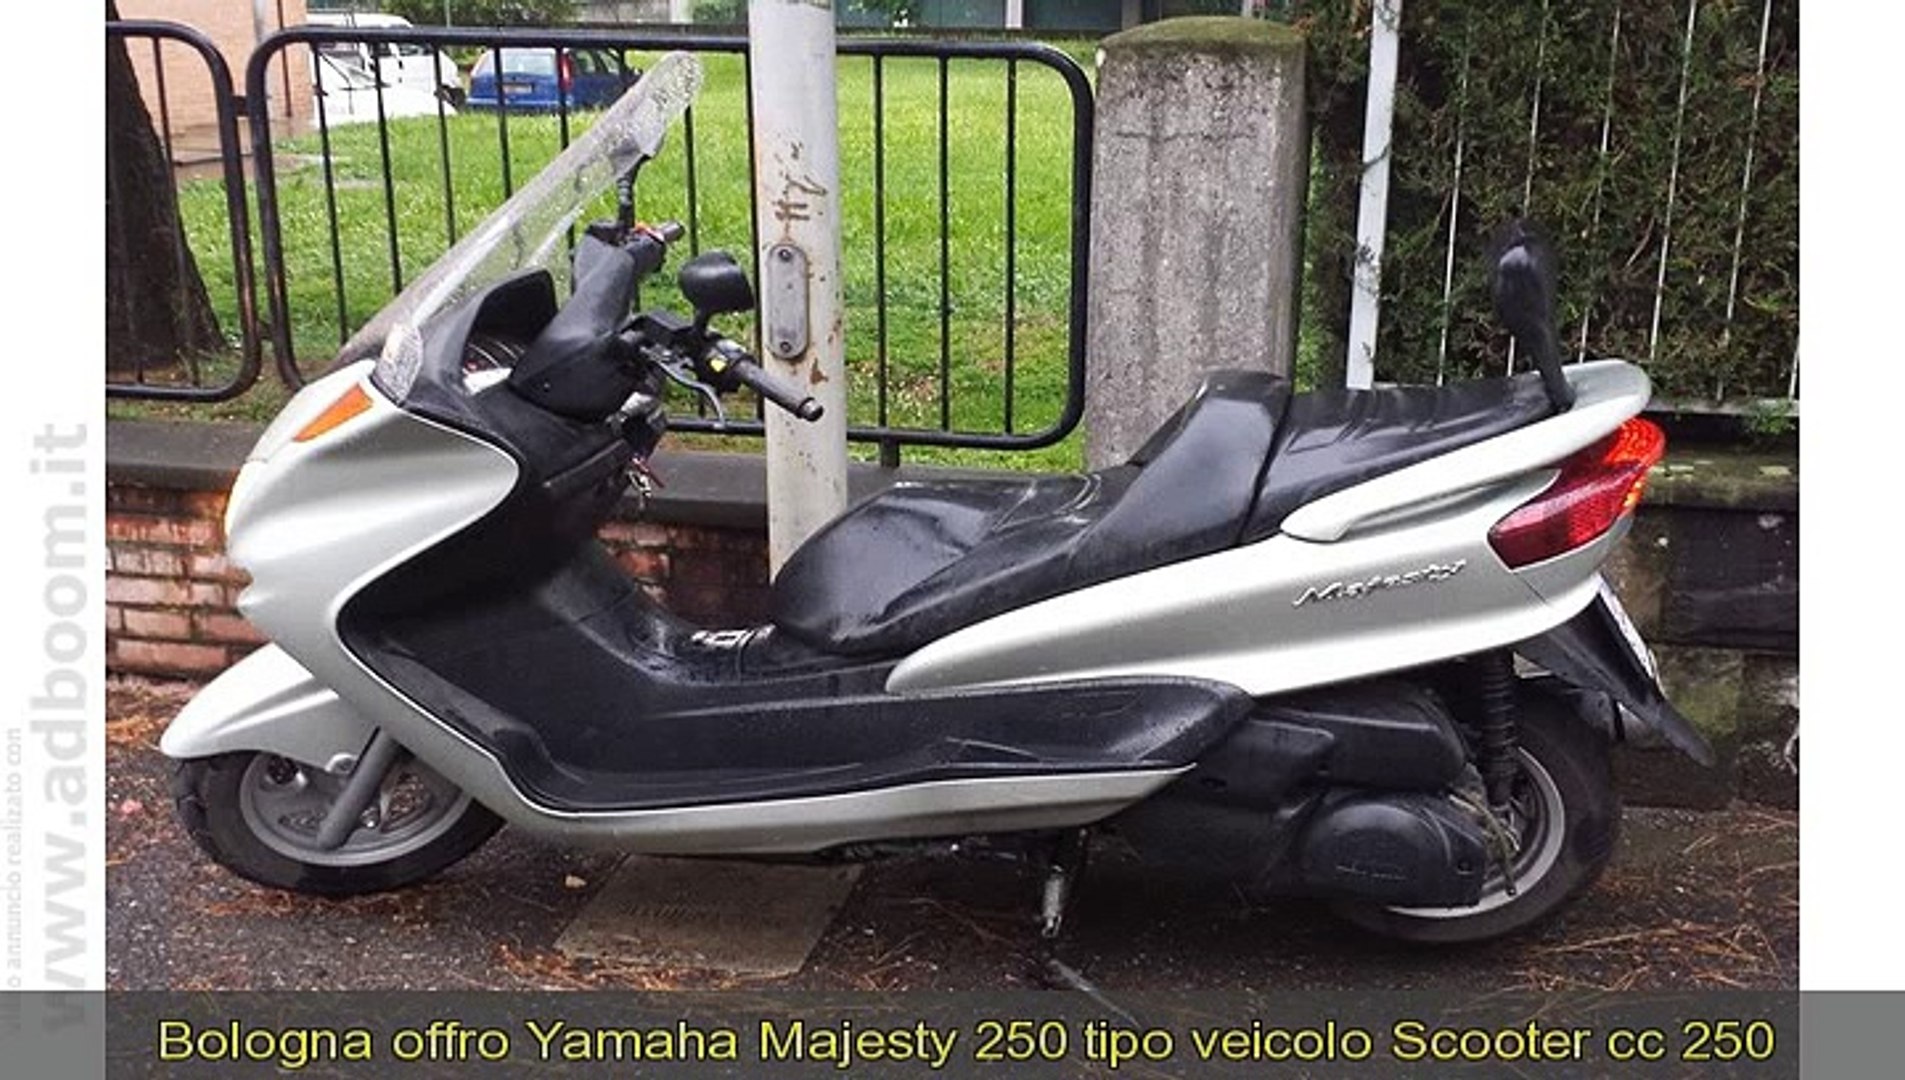 BOLOGNA, SASSO MARCONI YAMAHA MAJESTY 250 TIPO VEICOLO SCOOTER CC 250 -  Video Dailymotion